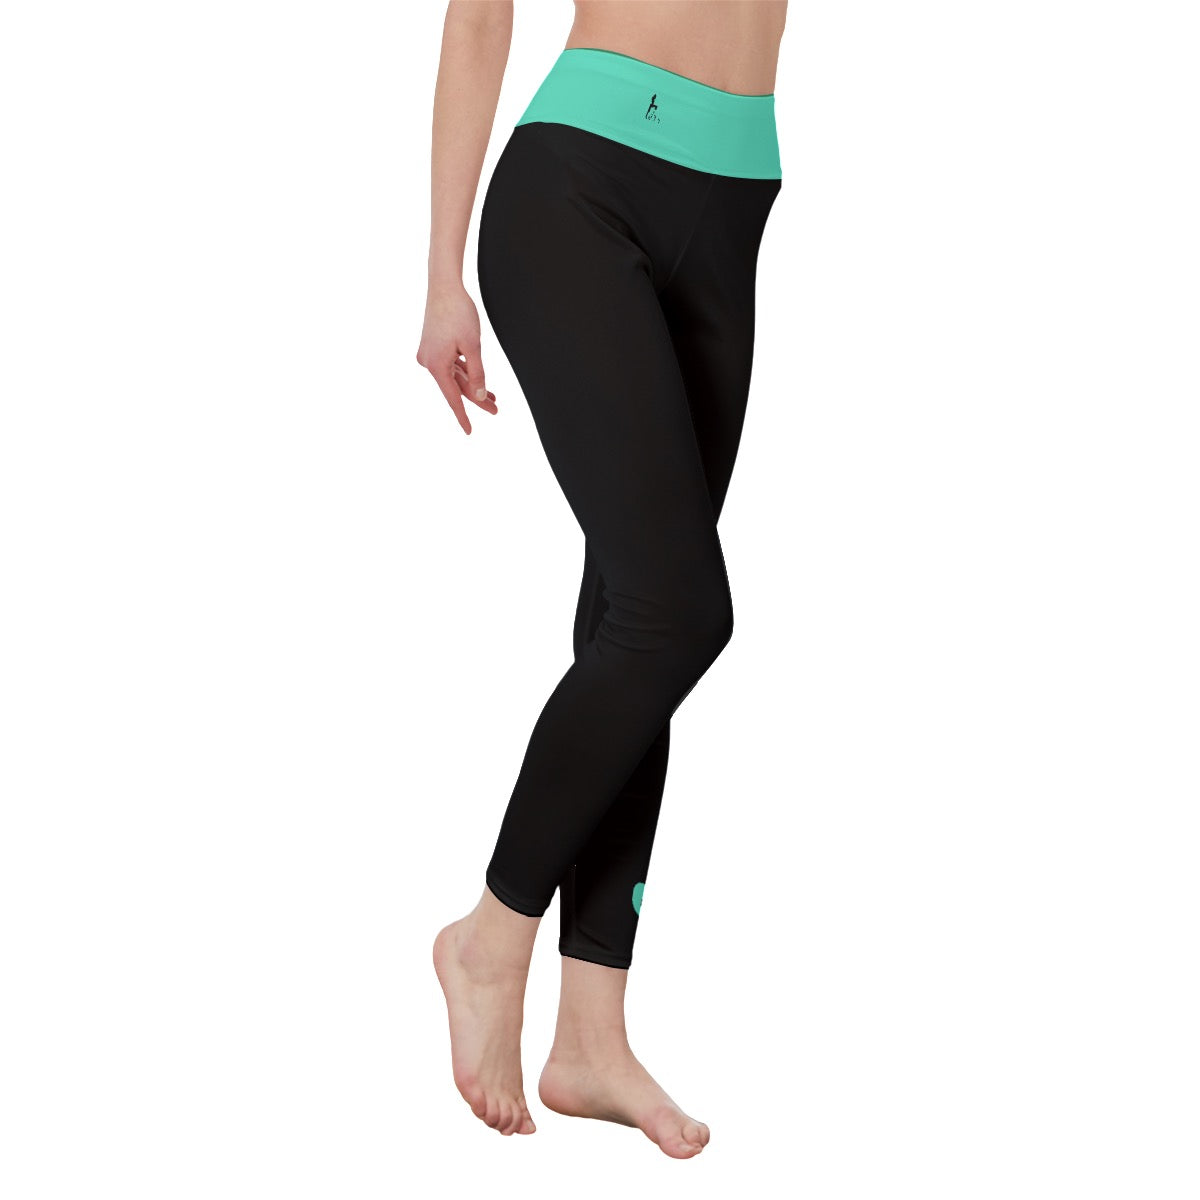 Officially Sexy Black Women's High Waist Leggings With  Turquoise Green Waist / Logo & Side Stitch Closure